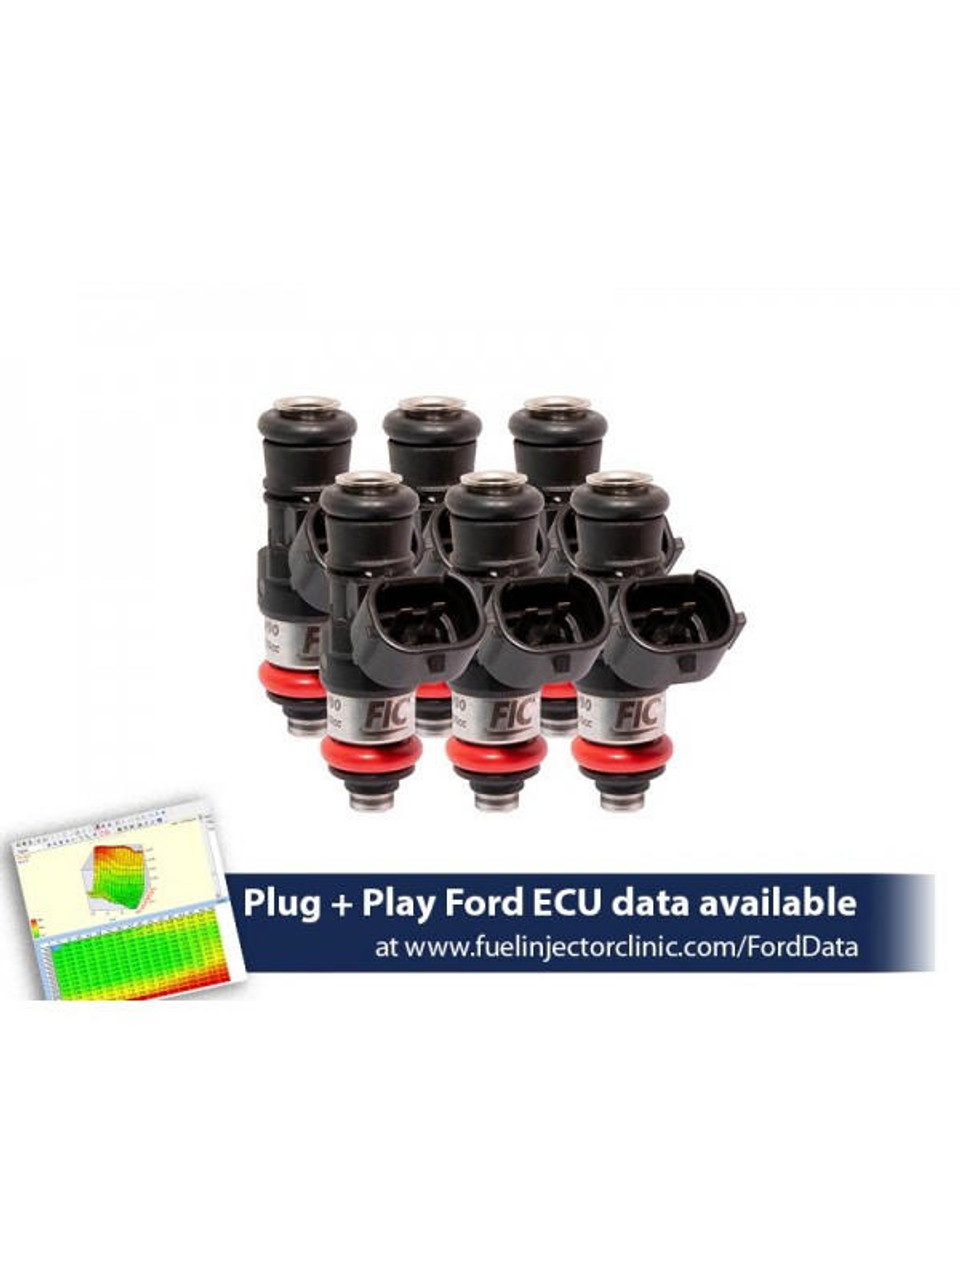  Fuel Injector Clinic 2150CC Injector Set V6 11-17 Mustang 